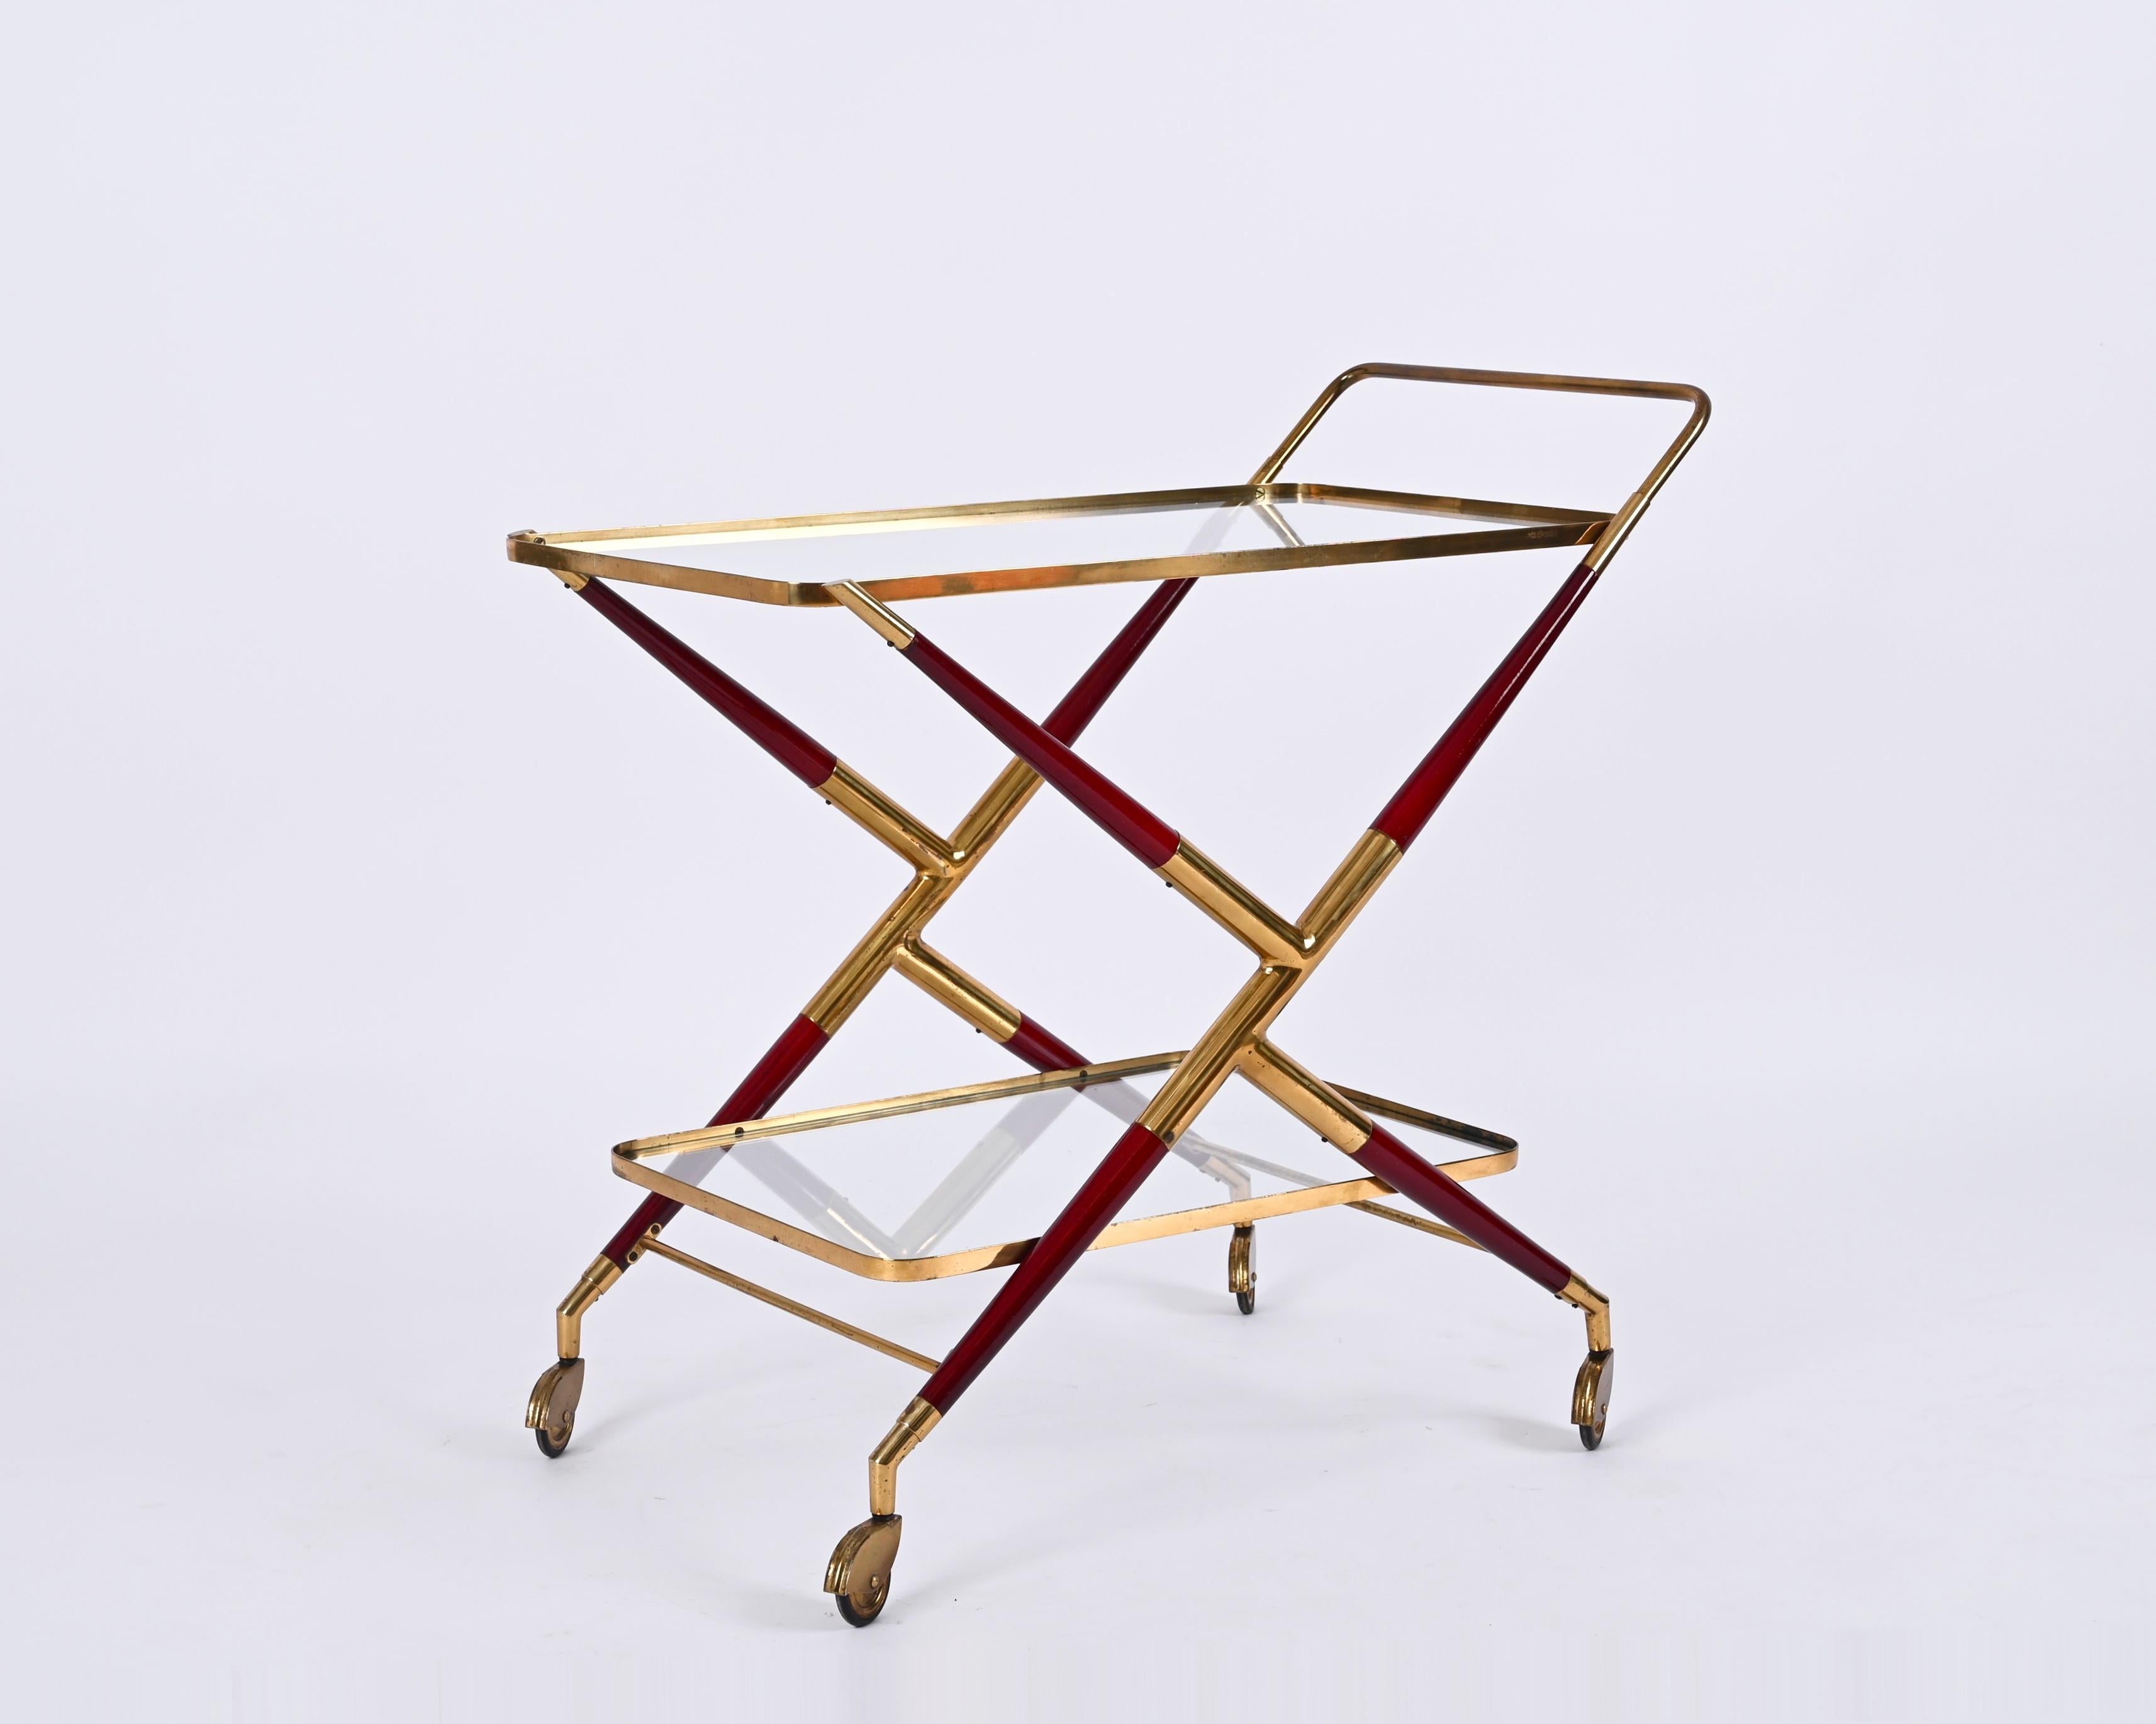 Marvellous Italian bar trolley in brass and burgundy red lacquered wood. This stunning piece was designed by Cesare Lacca in the 1950s in Italy. 

The cart is in its fully original configuration, it features an X-shaped structure in brass and a